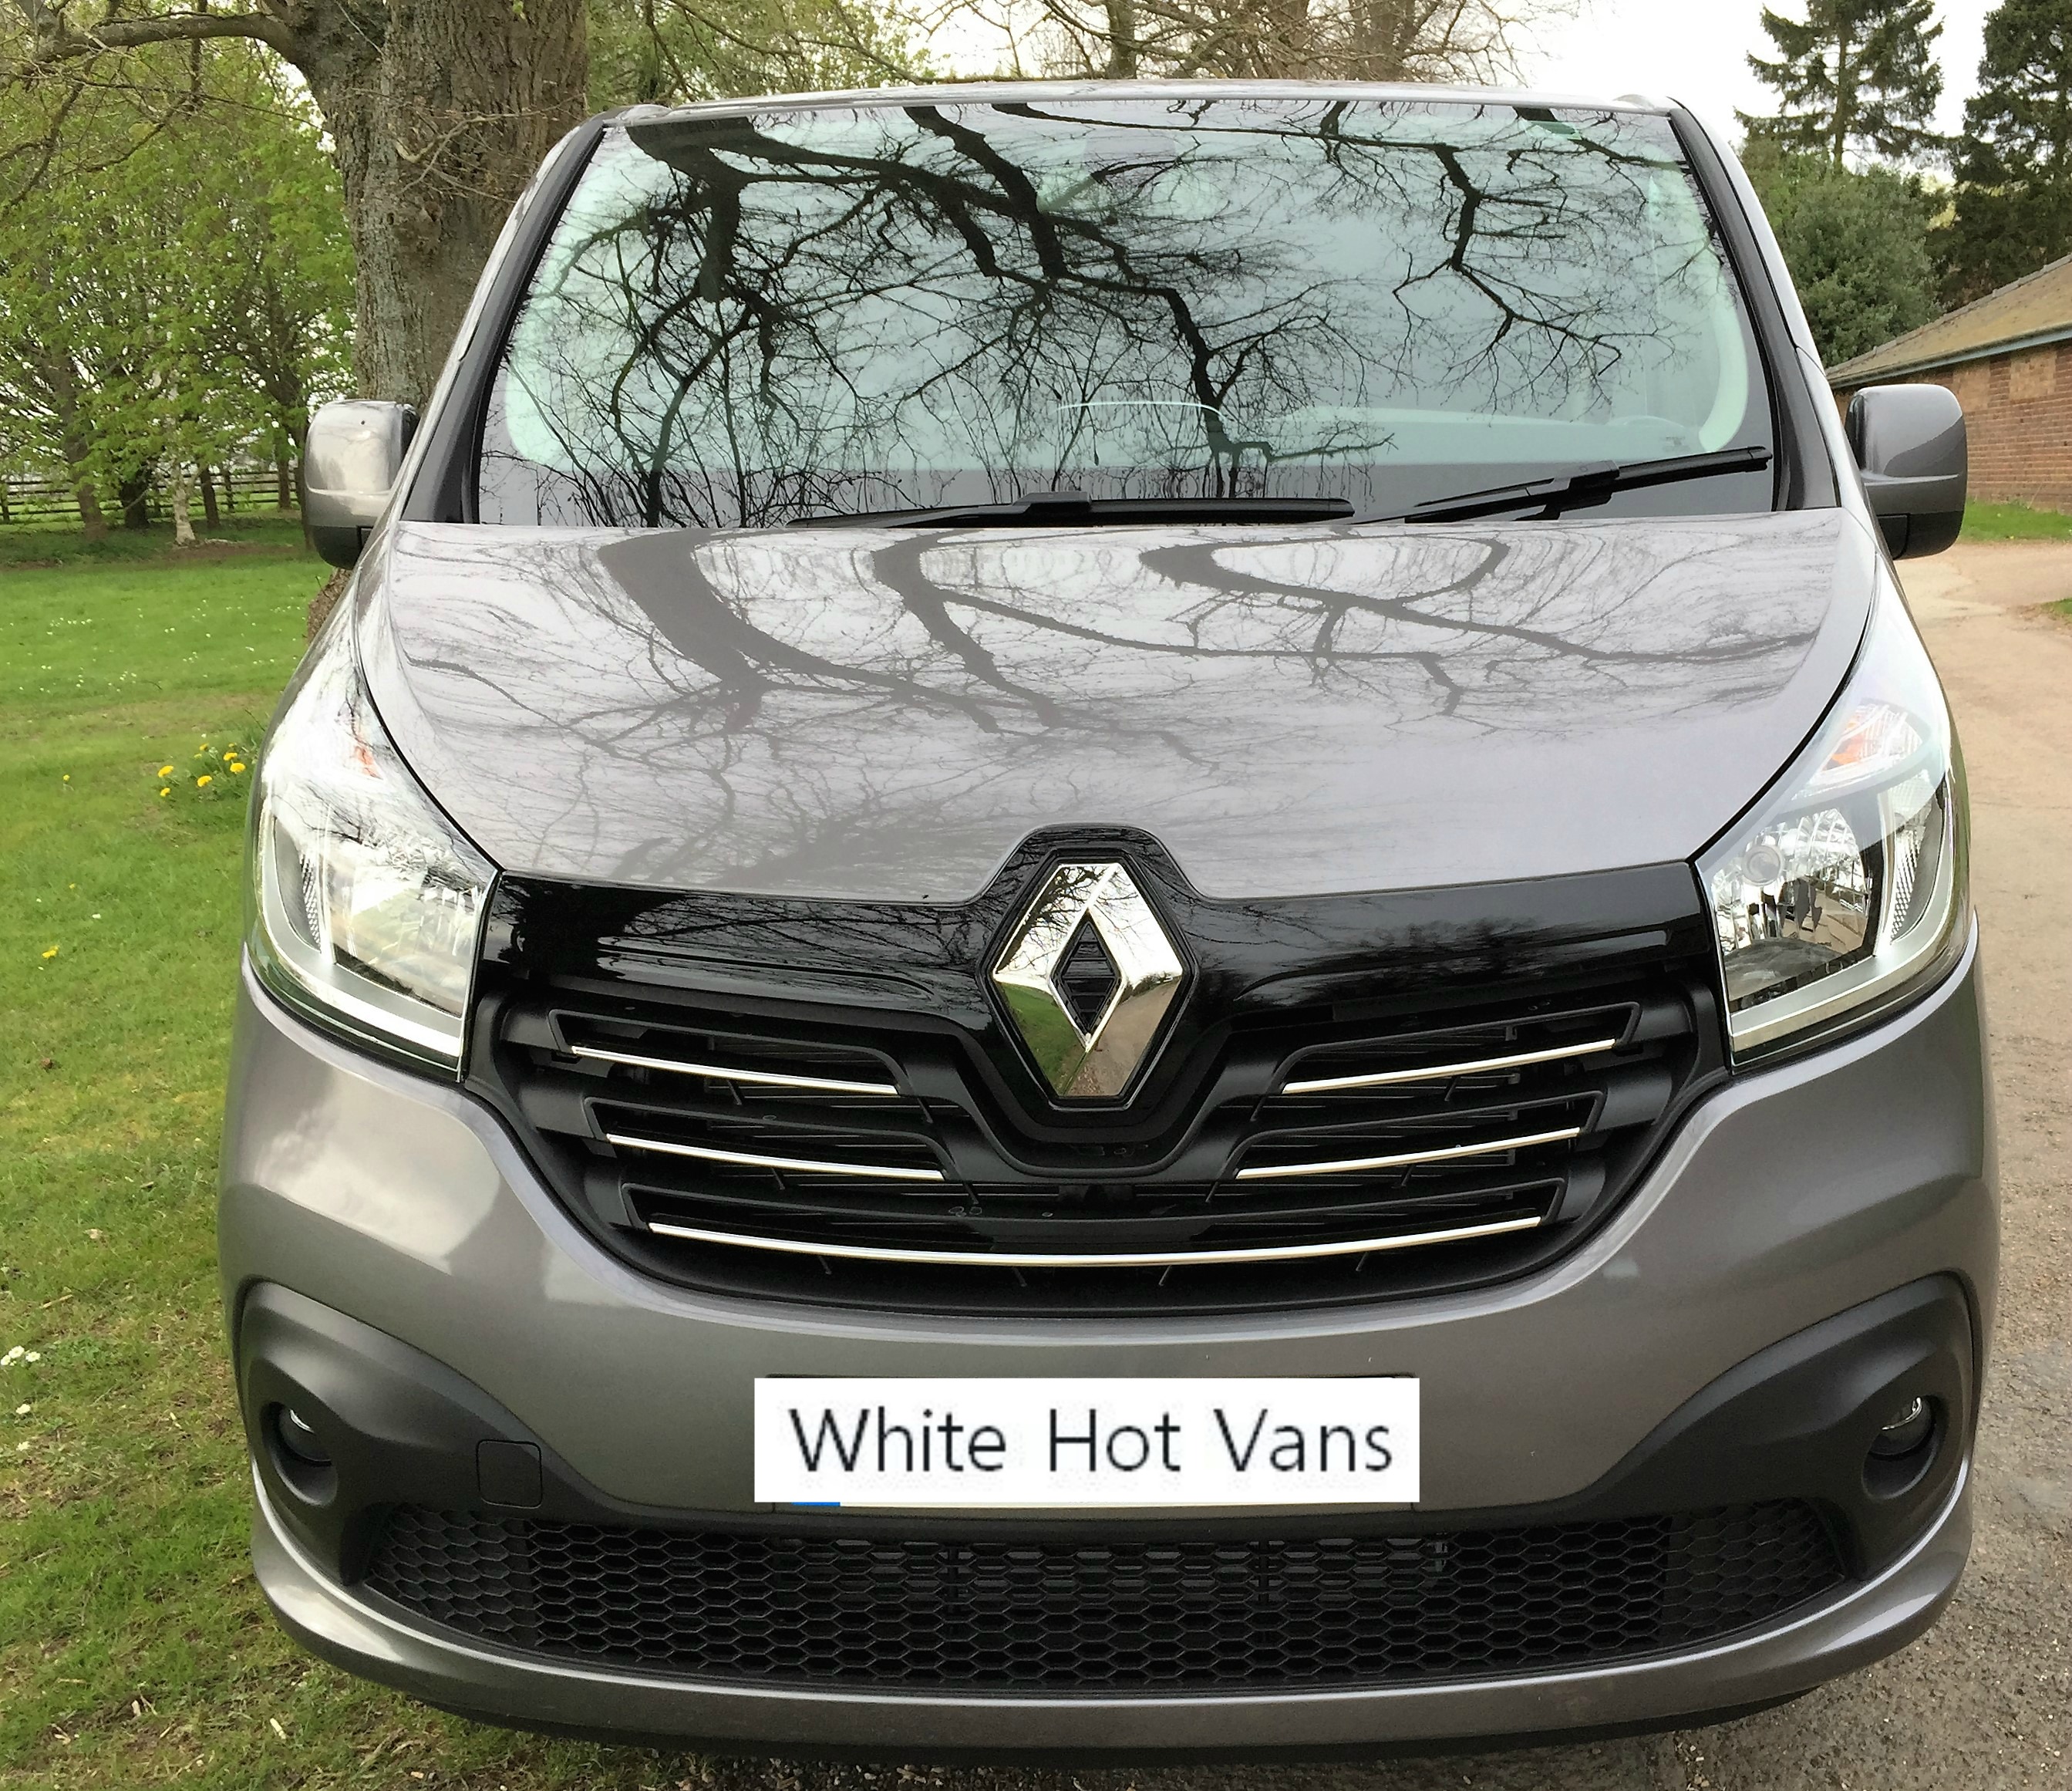 renault trafic sport lease